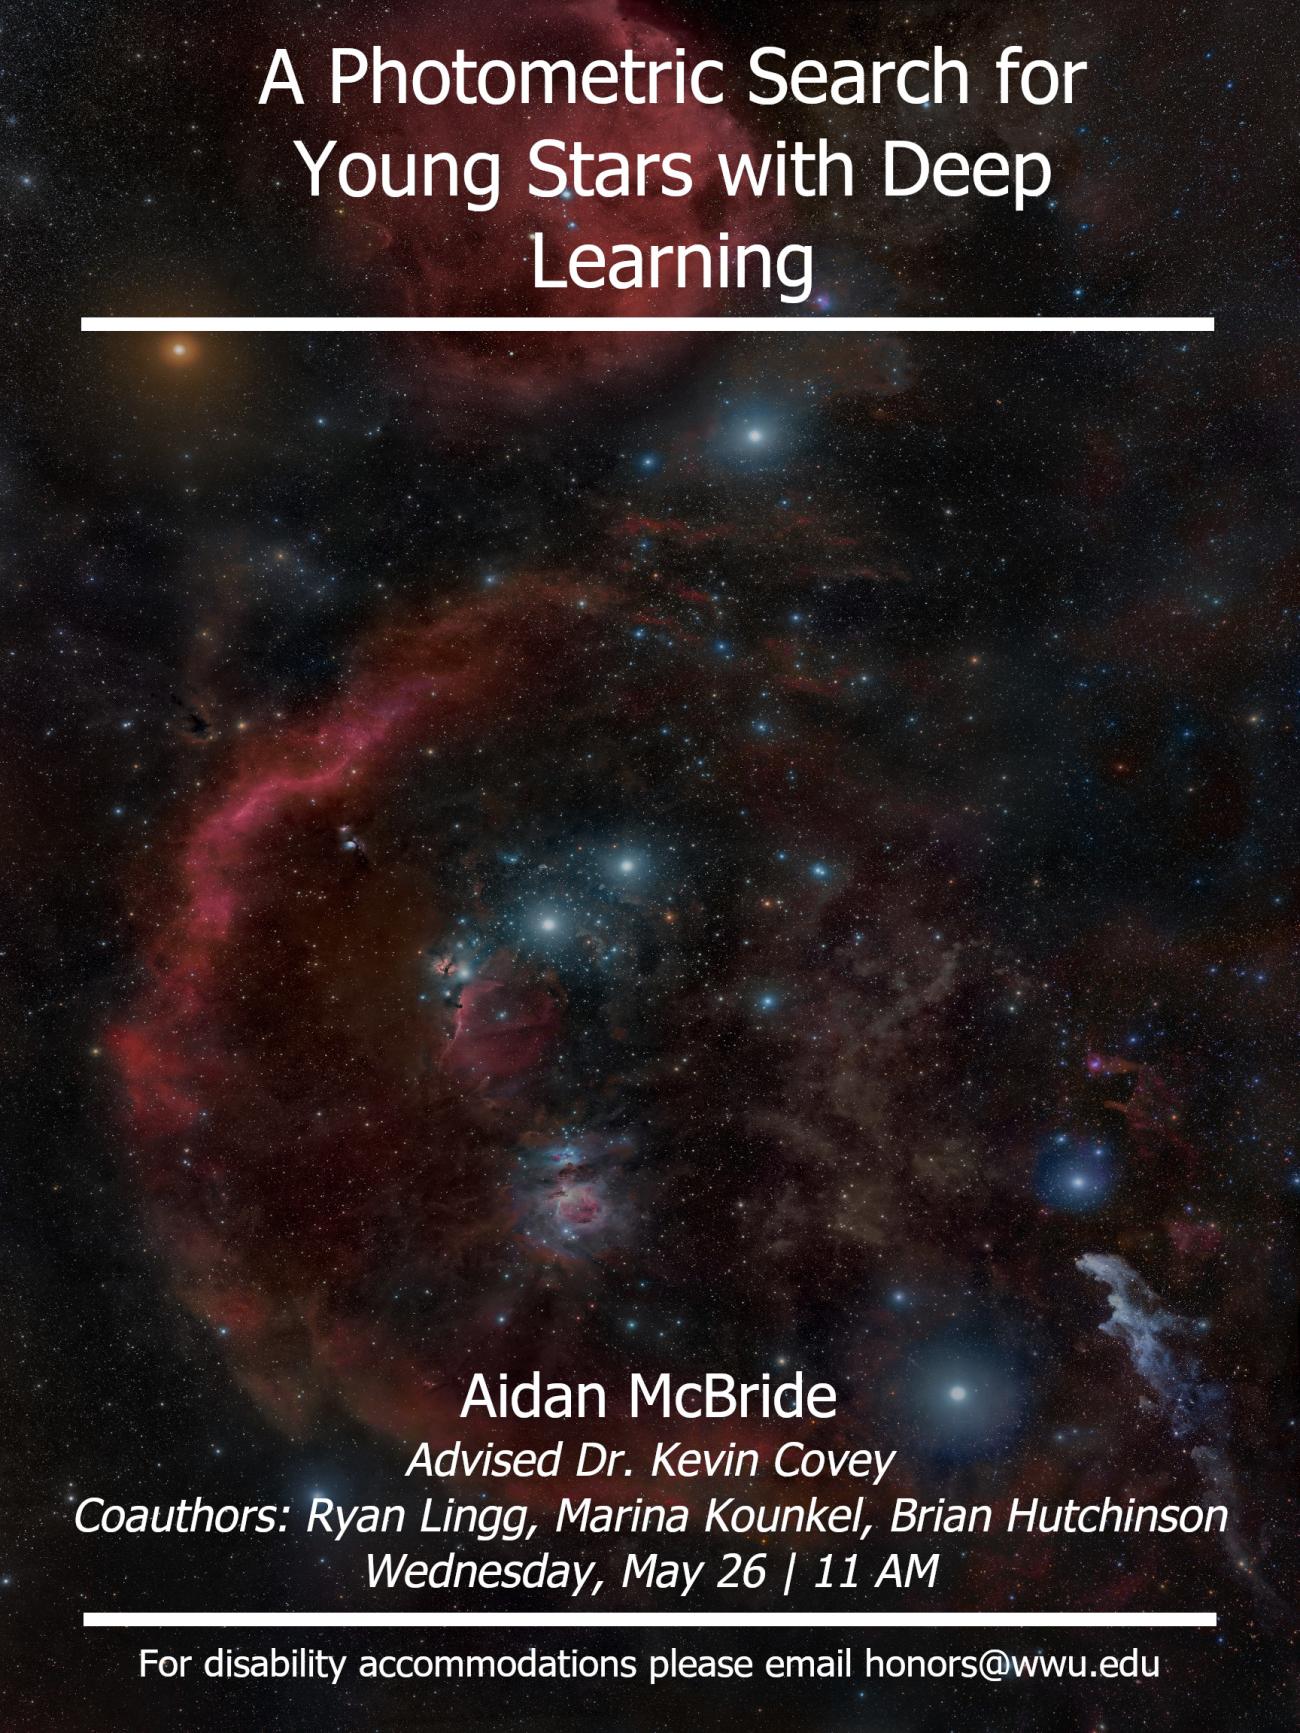 A galaxy background with white text over it reading: "A Photometric Search for Young Stars with Deep Learning. Aidan McBride. Advised by Dr. Kevin Covey. Coauthors: Ryan Lingg, Marina Kounkel, Brian Hutchinson  Wednesday, May 26 | 11 Am  For disability accommodations please email honors@wwu.edu"